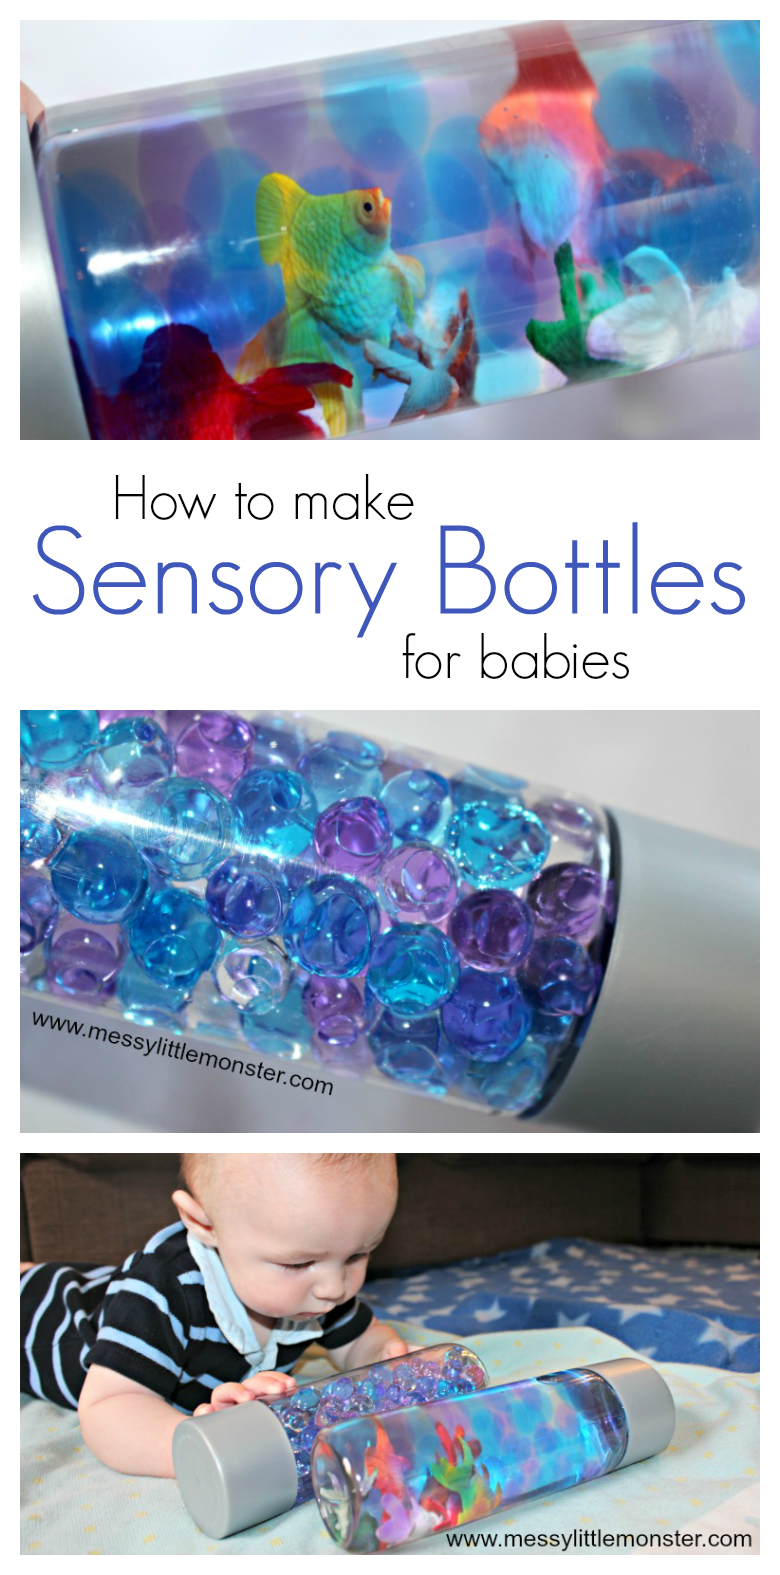 Easy homemade sensory play activities for babies - Making sensory bottles for babies.  Ocean in a bottle water bead sensory bottles for babies, toddlers or as calm down bottles. 4 month baby activity, 5 month baby activity, 6 month baby activity.